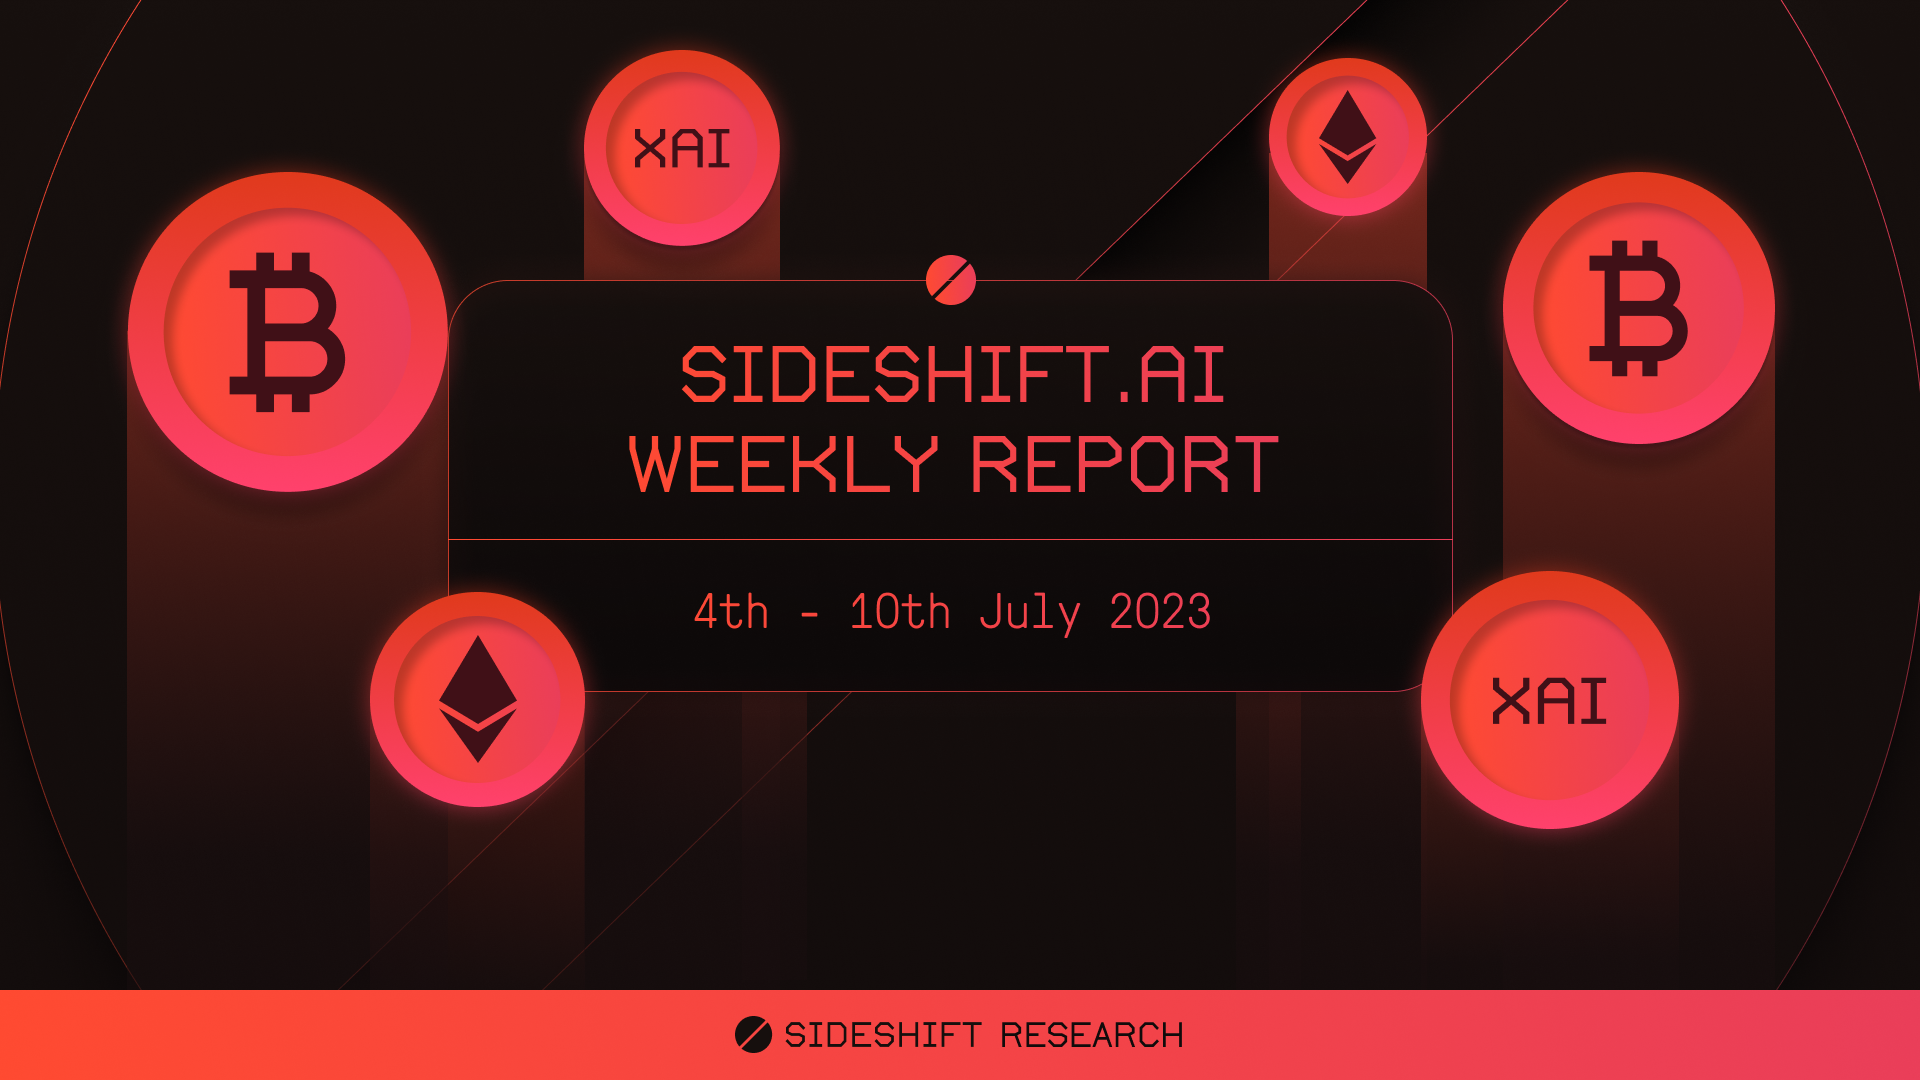 SideShift.ai Weekly Report | 4th - 10th July 2023